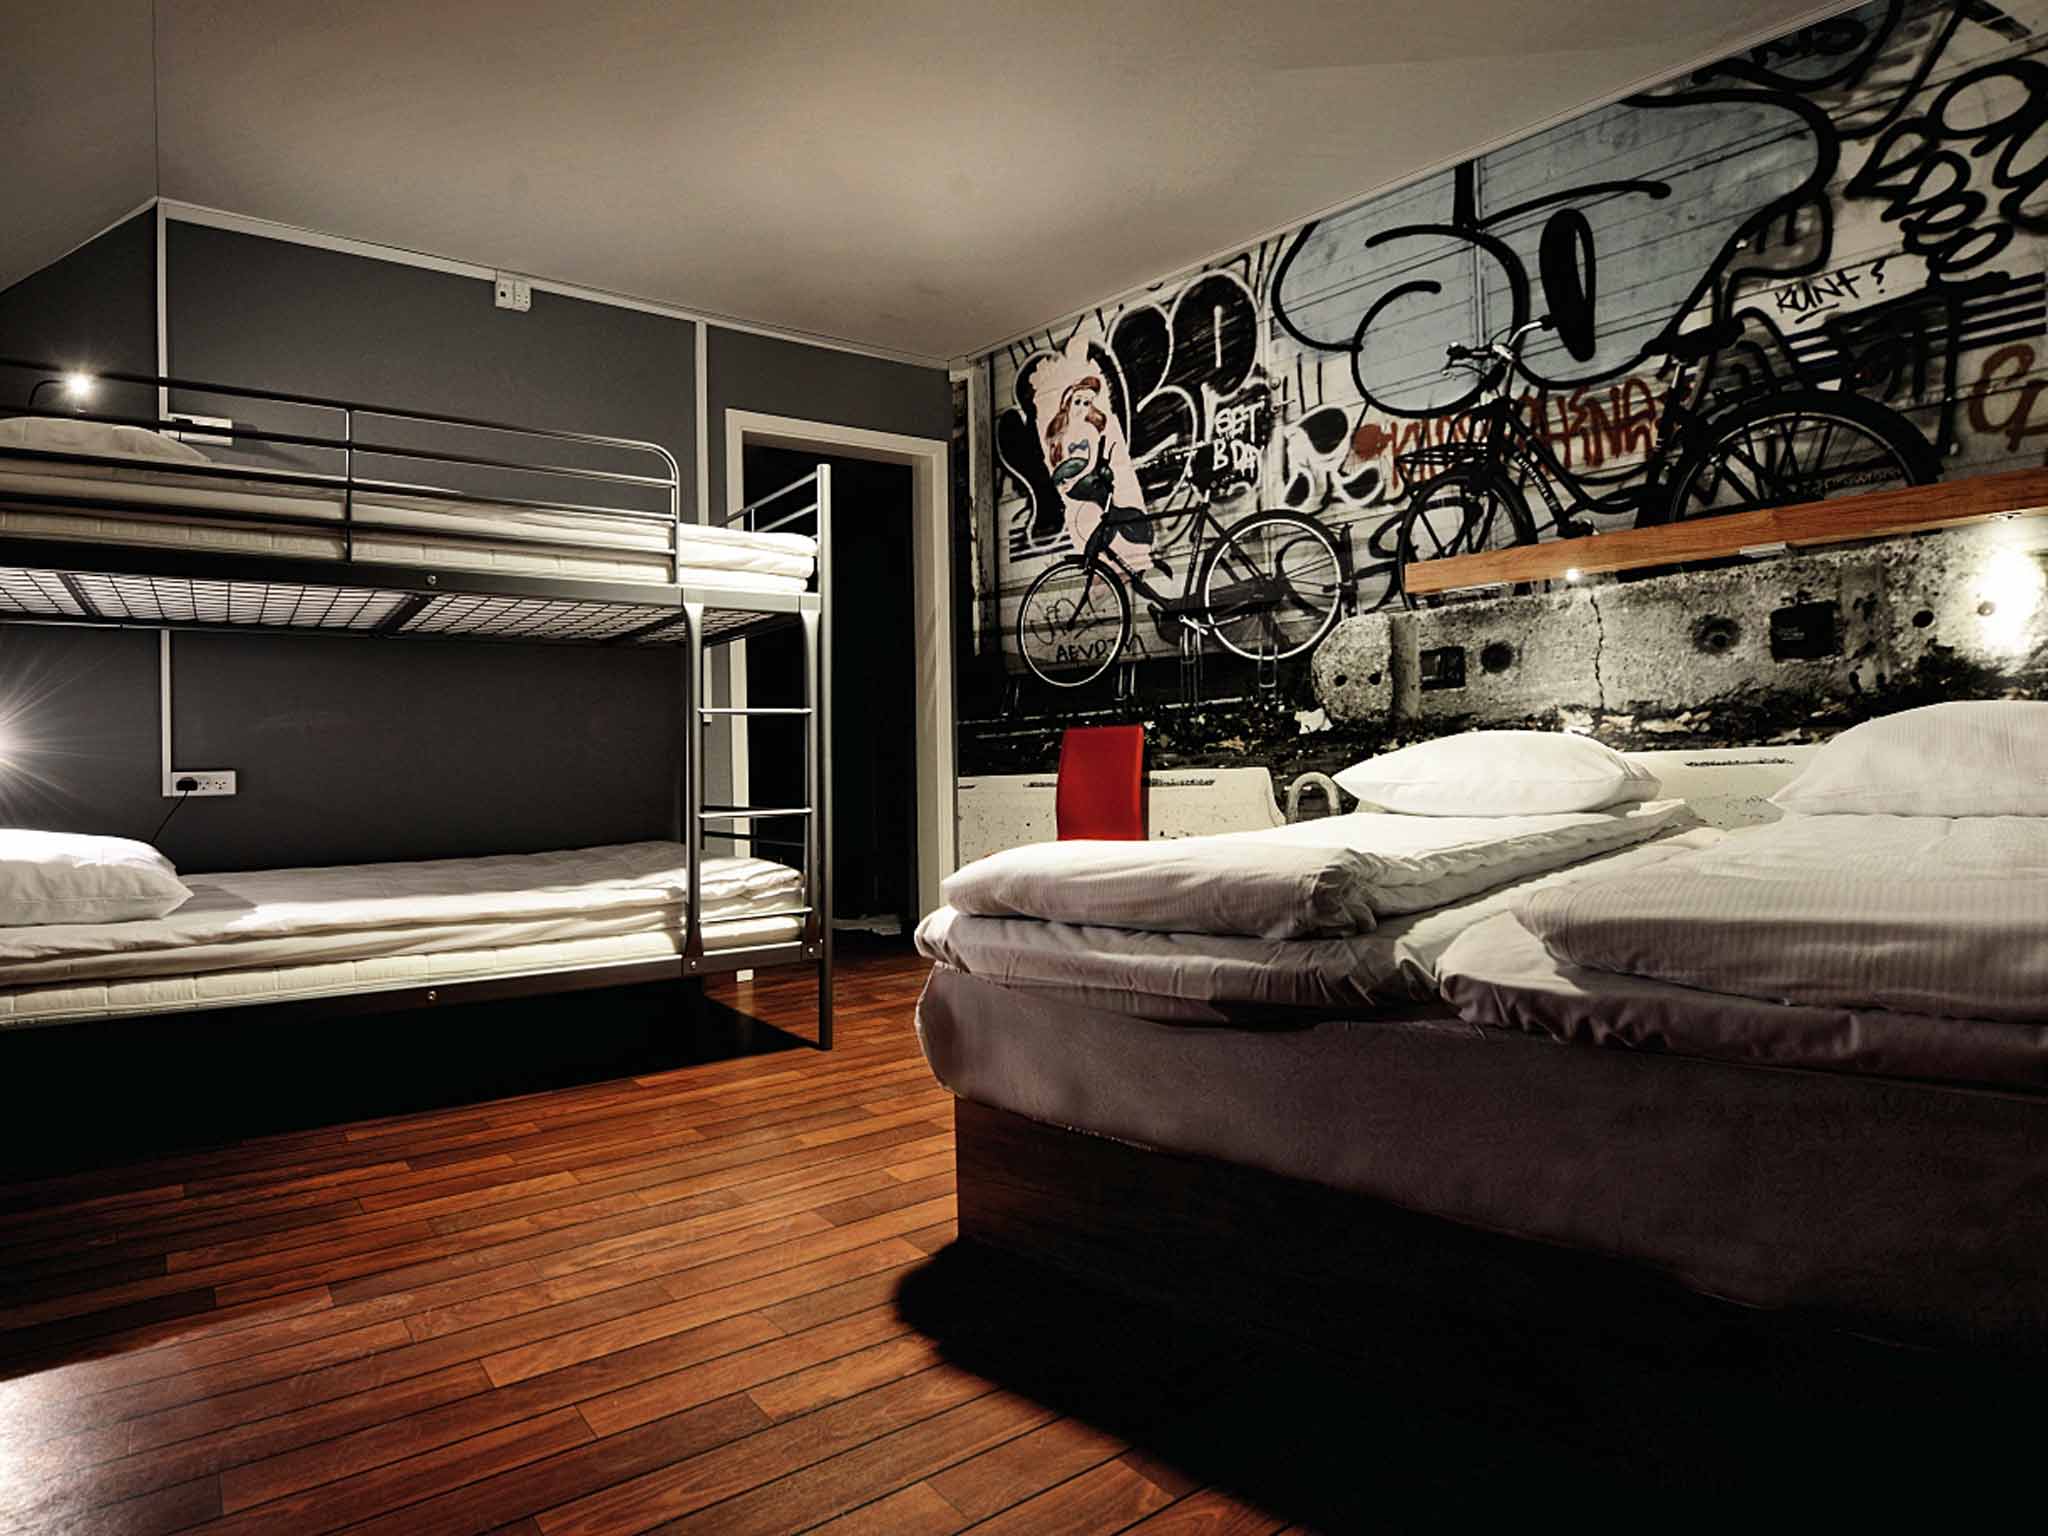 Urban House, Copenhagen: Hostels don't get hipper than the Urban House, which opened last month